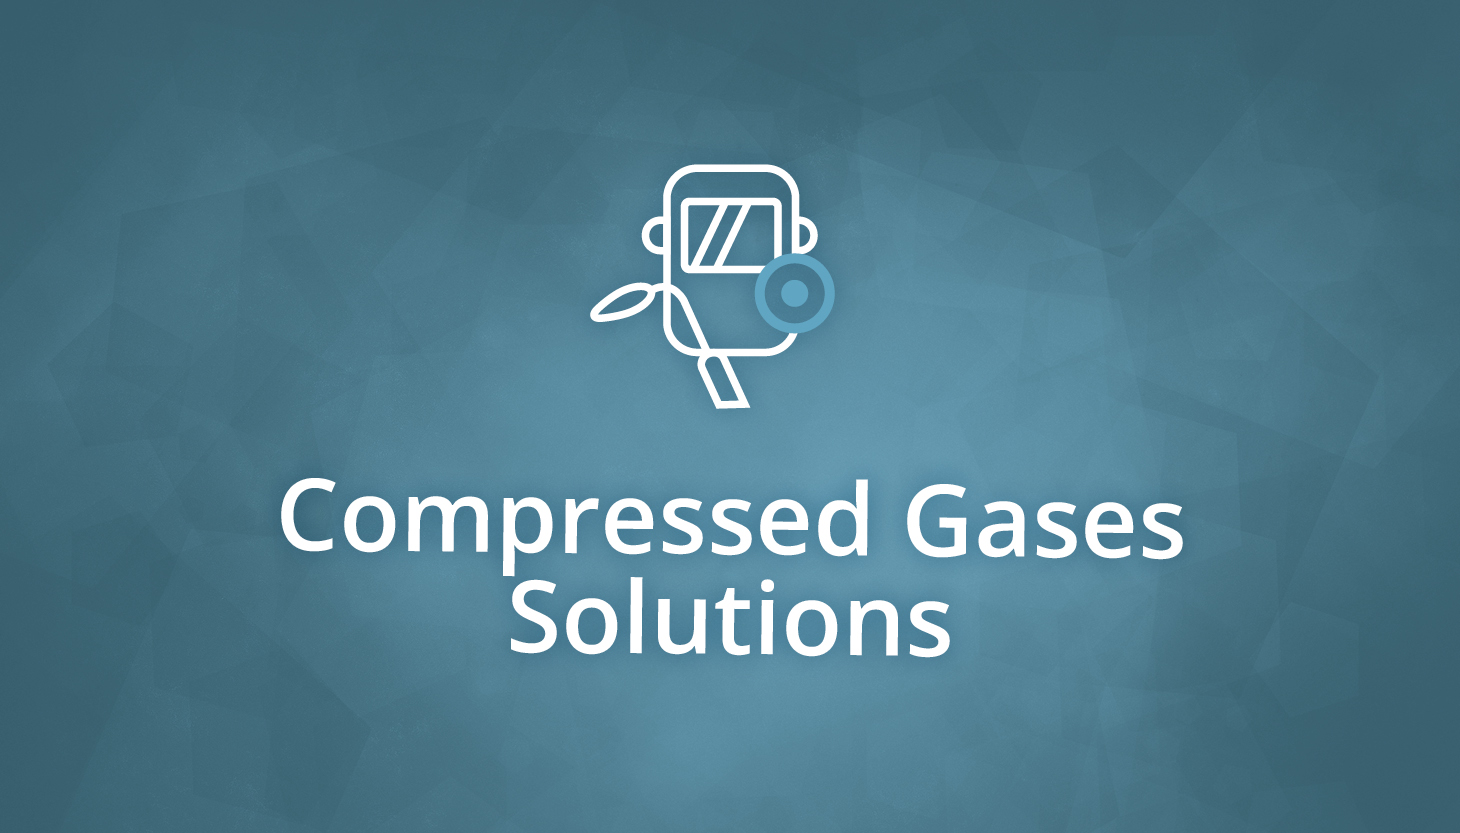 New LoB Compressed Gas Equipment Appointment Announcement for Cavagna Group